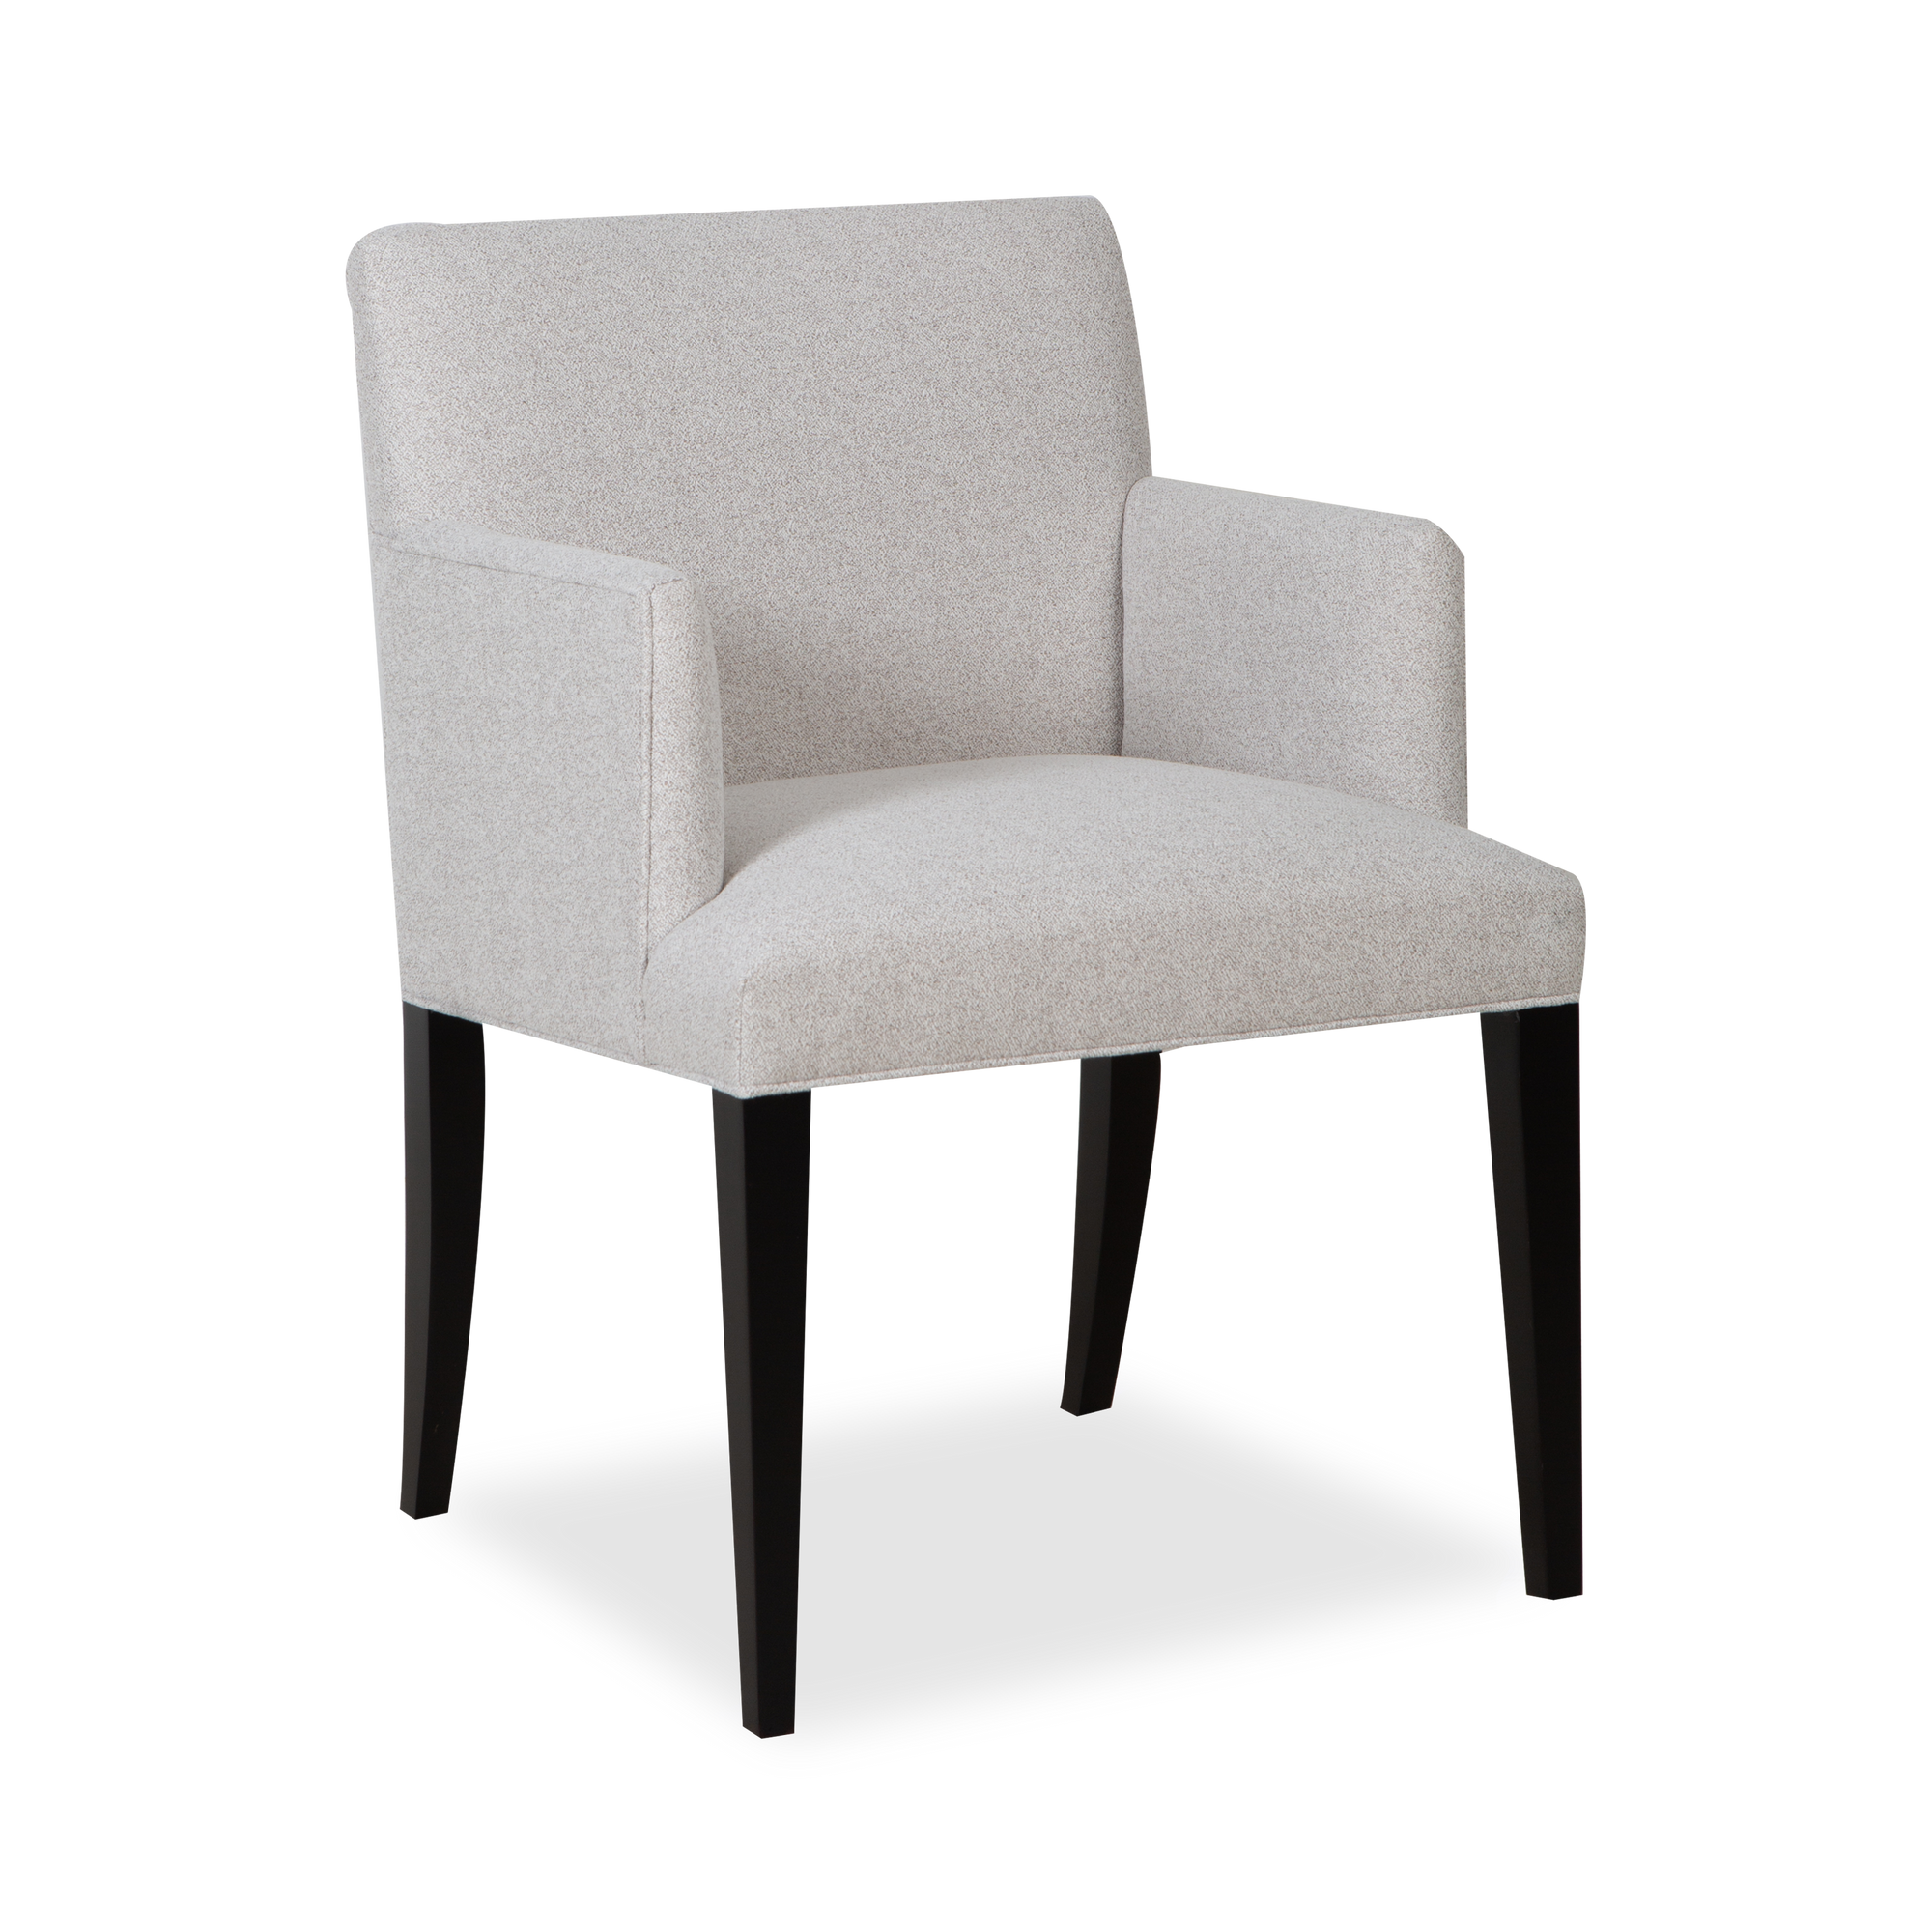 A minimal form with comfortable arms combines with modern ivory-coloured upholstery to create this essential modern dining chair.